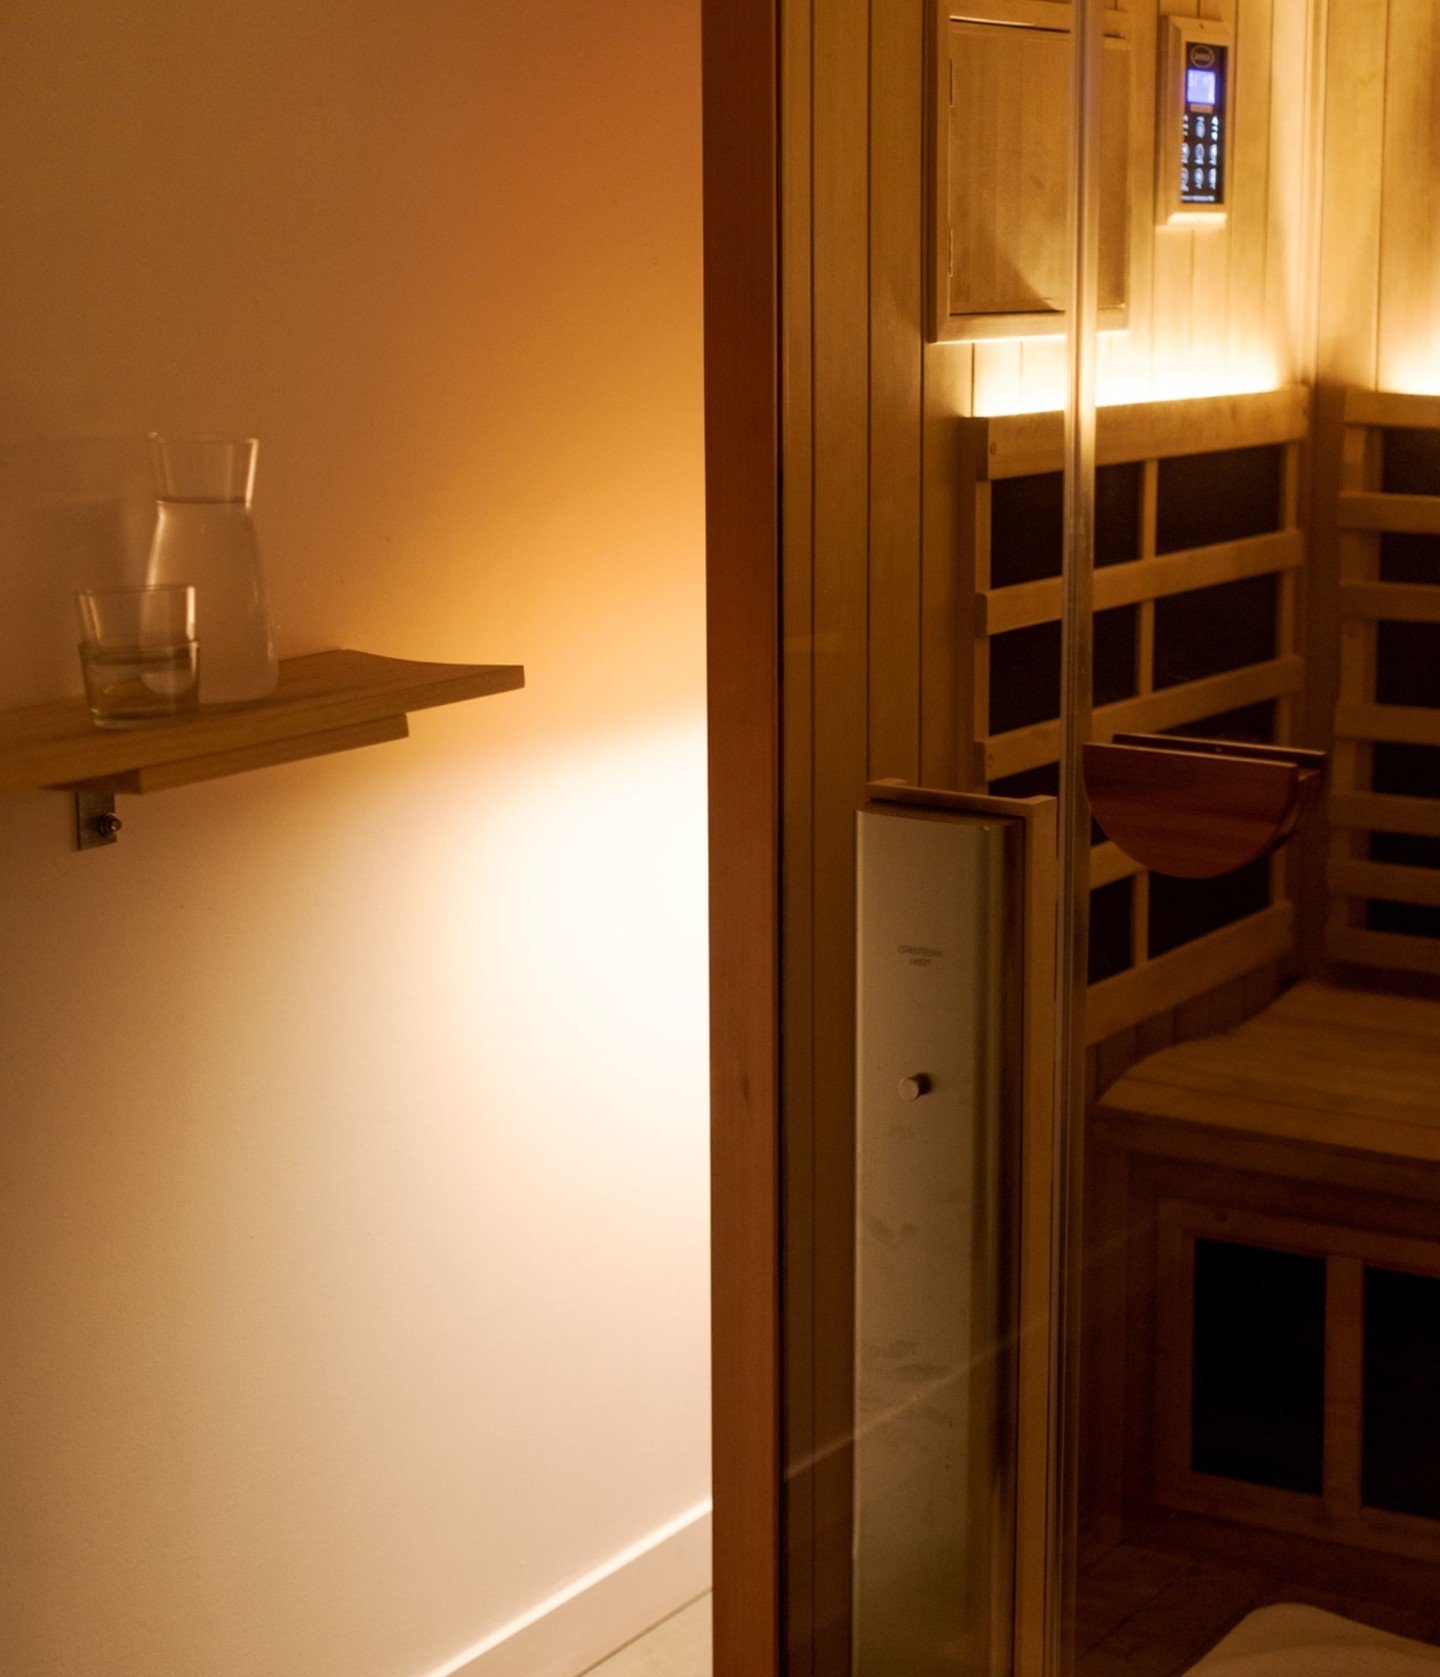 Why you should book an infrared sauna this weekend 💆🏽&zwj;♀️
⁠
1. It's a long weekend and you deserve some time out⁠
2. You'll feel amazing and your body will thank you⁠
⁠
Okay aside from the obvious that you we think you should treat yourself, her